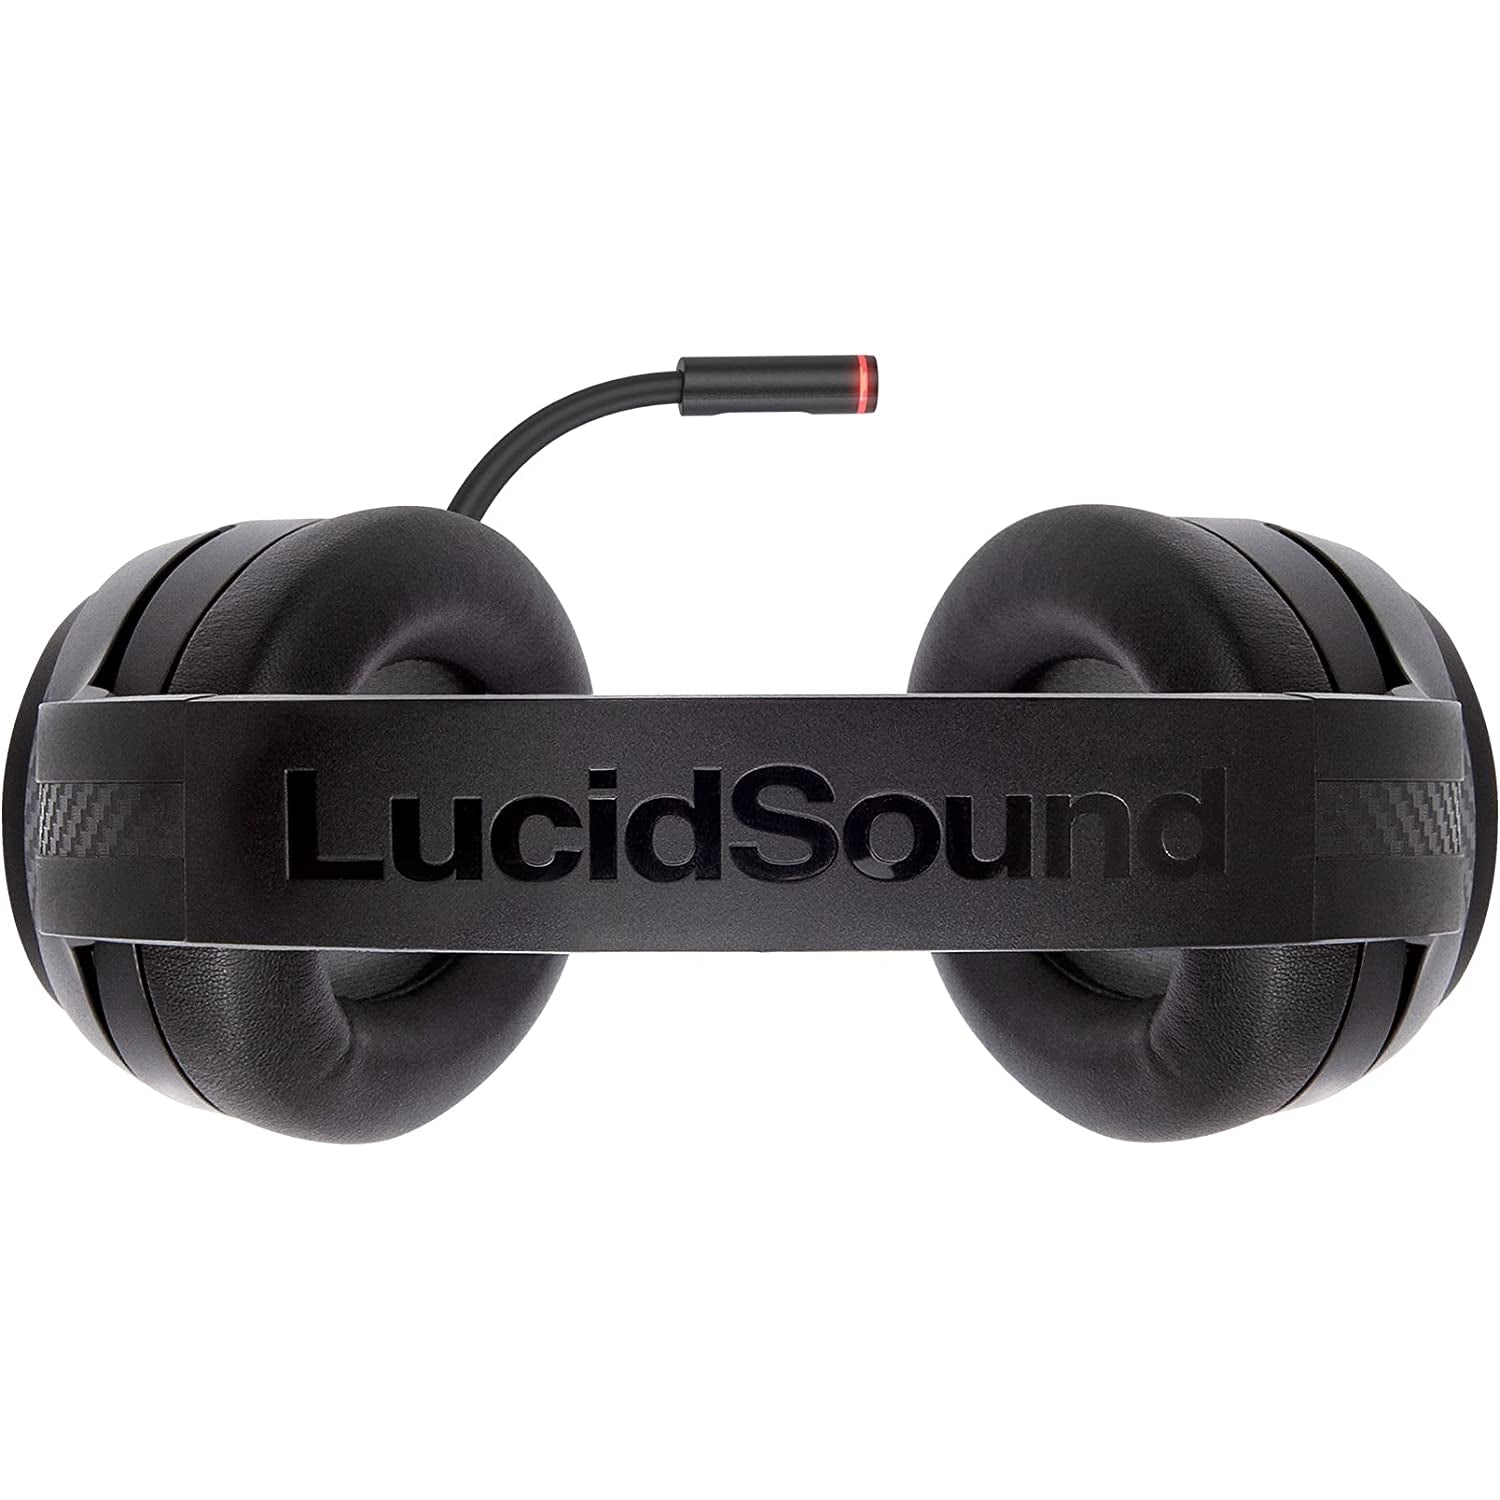 LucidSound LS15P Wireless Stereo Gaming Headset for PlayStation 4/5